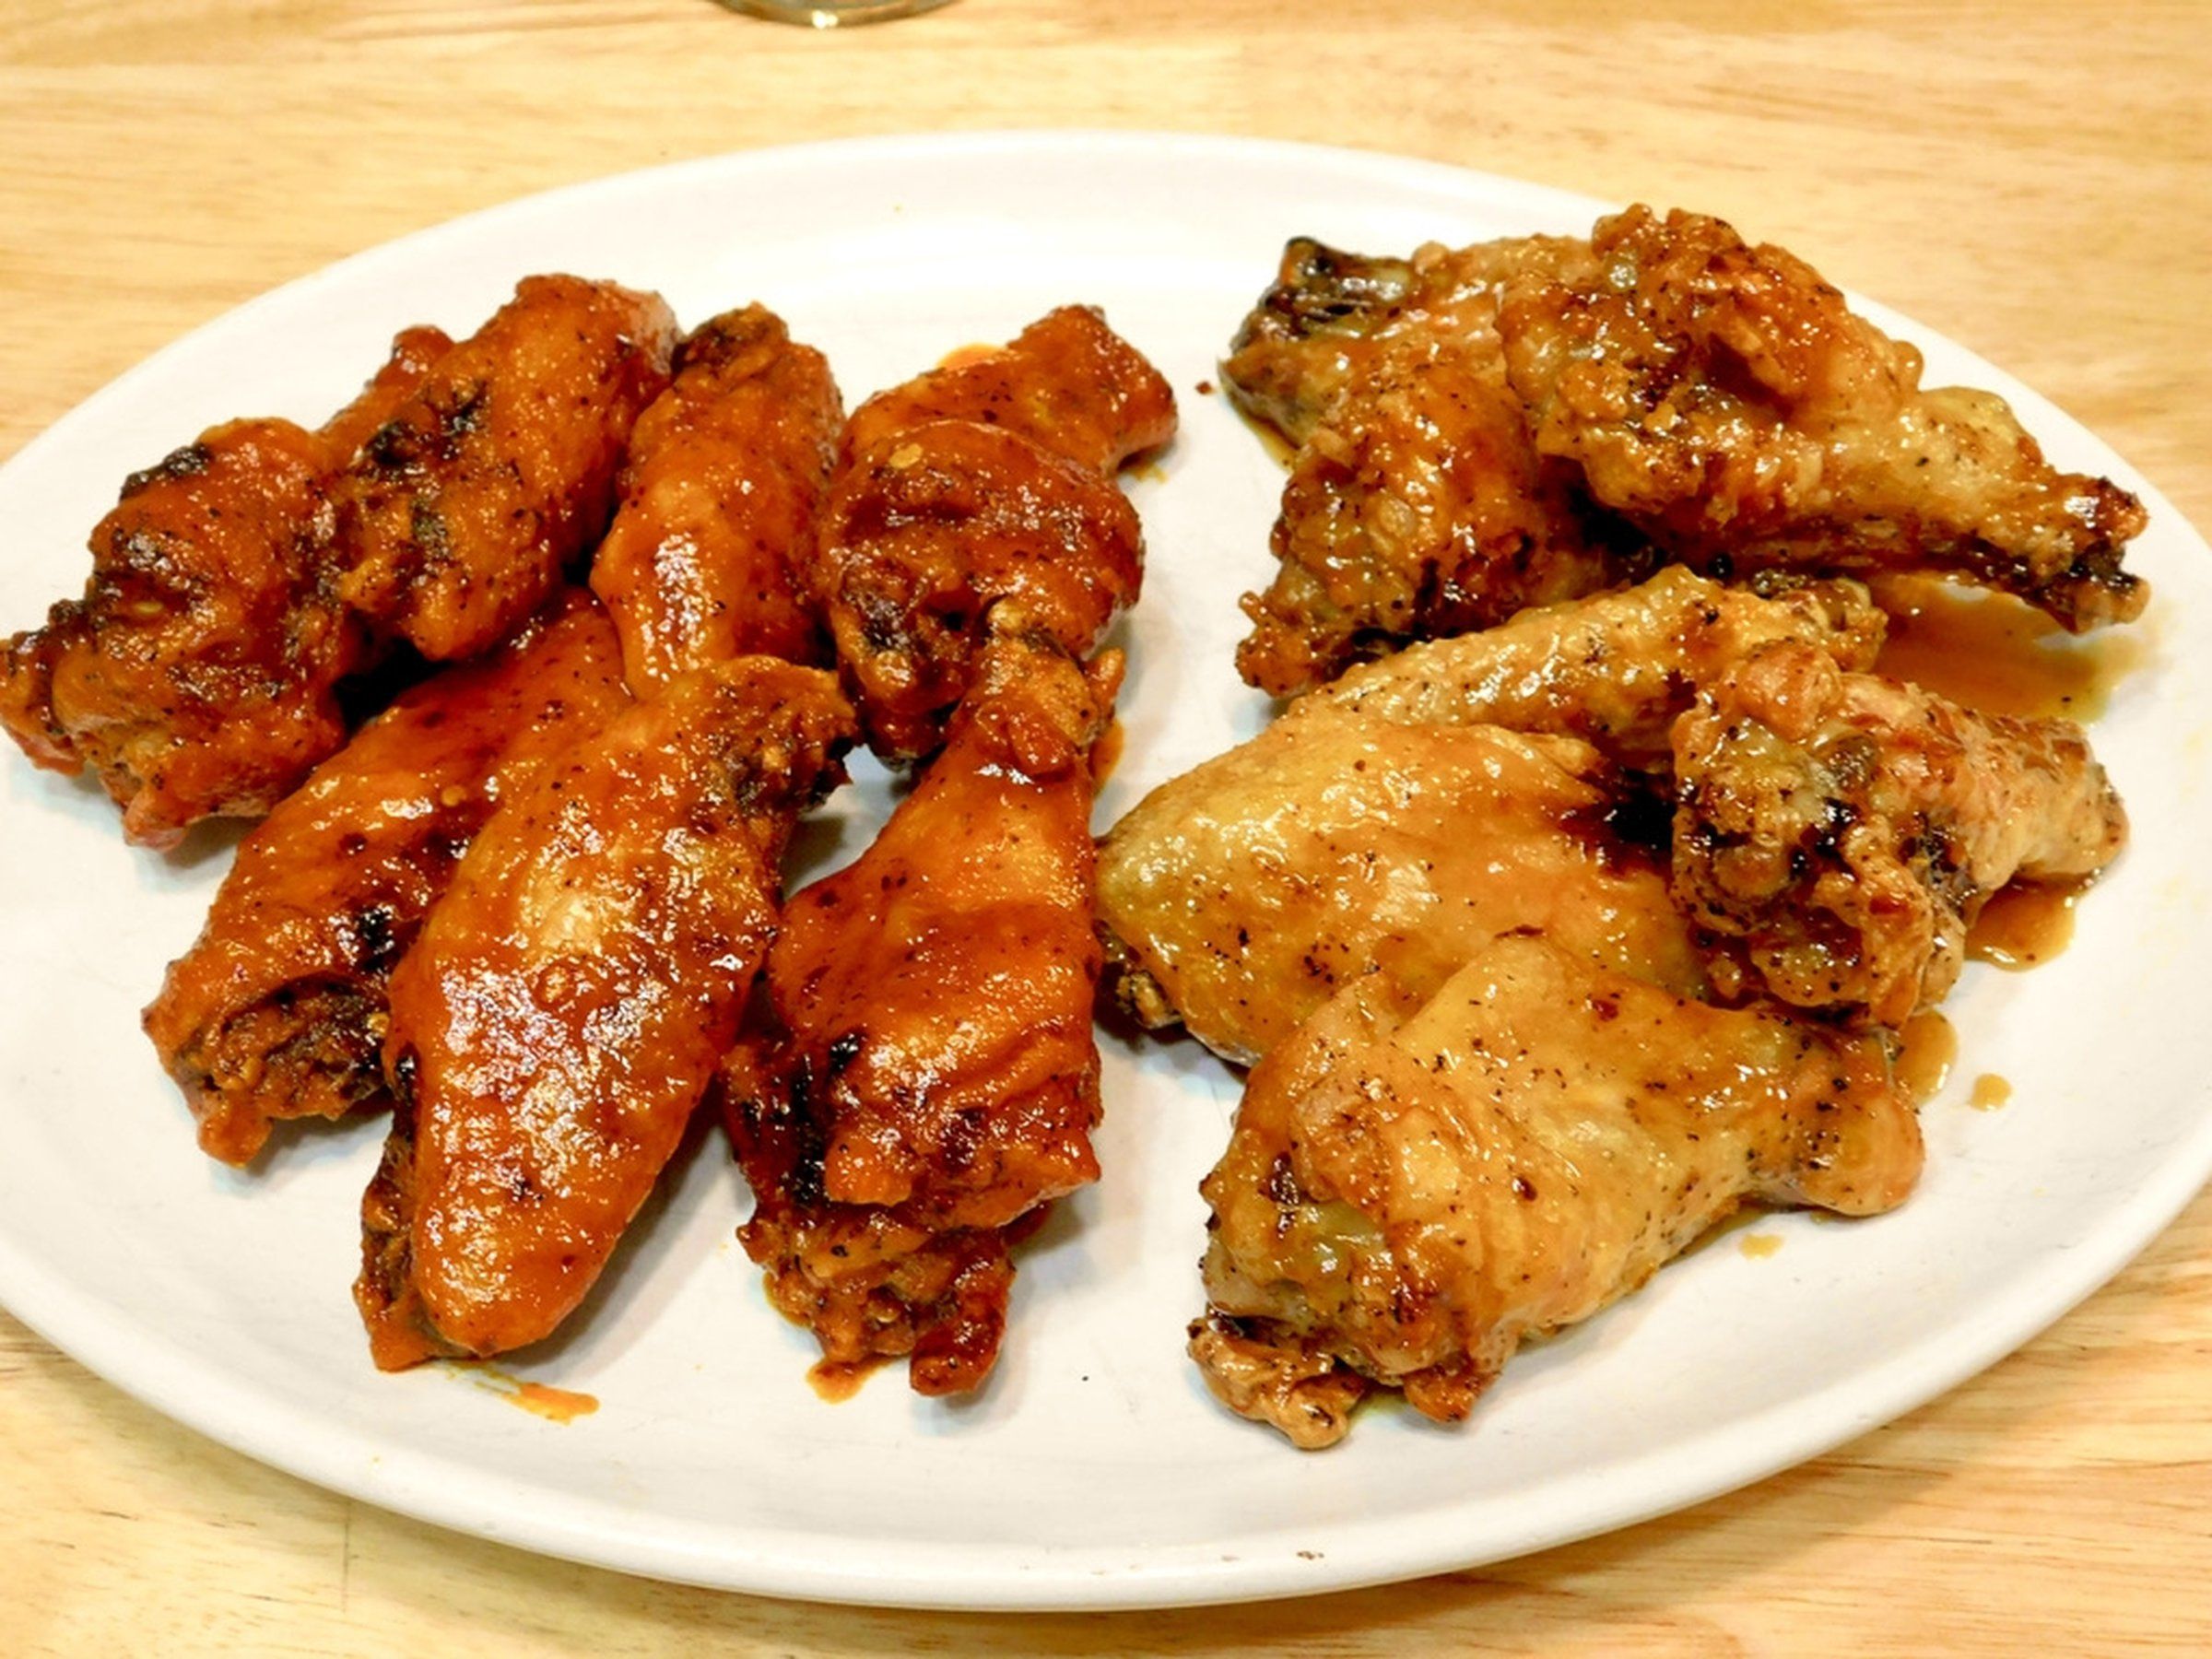 baked wings recipes with baking powder